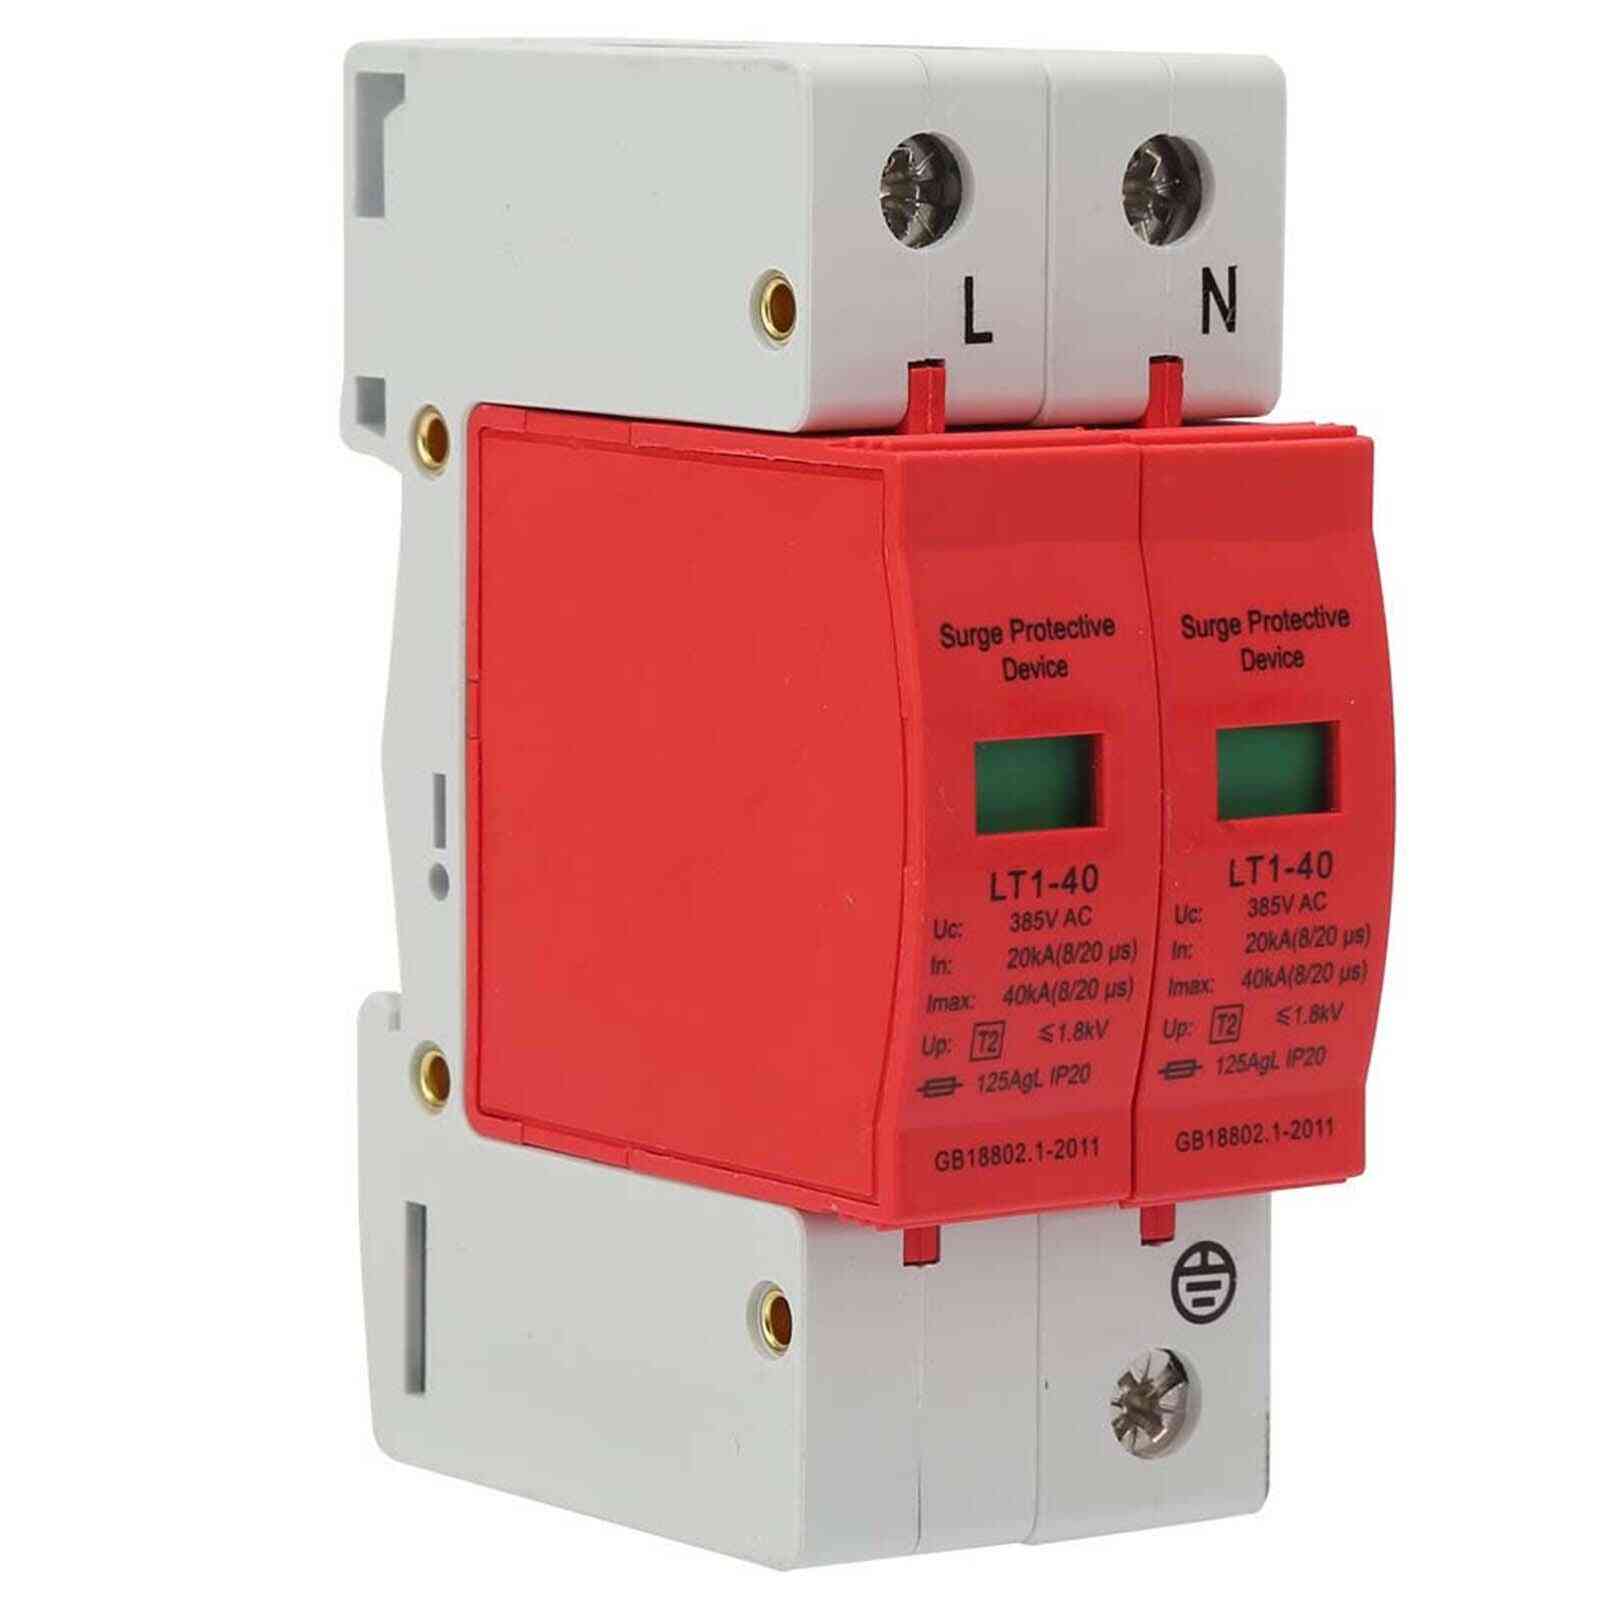 Surge Protective Device- Thunder Low-voltage, Arrester Rail Mounting